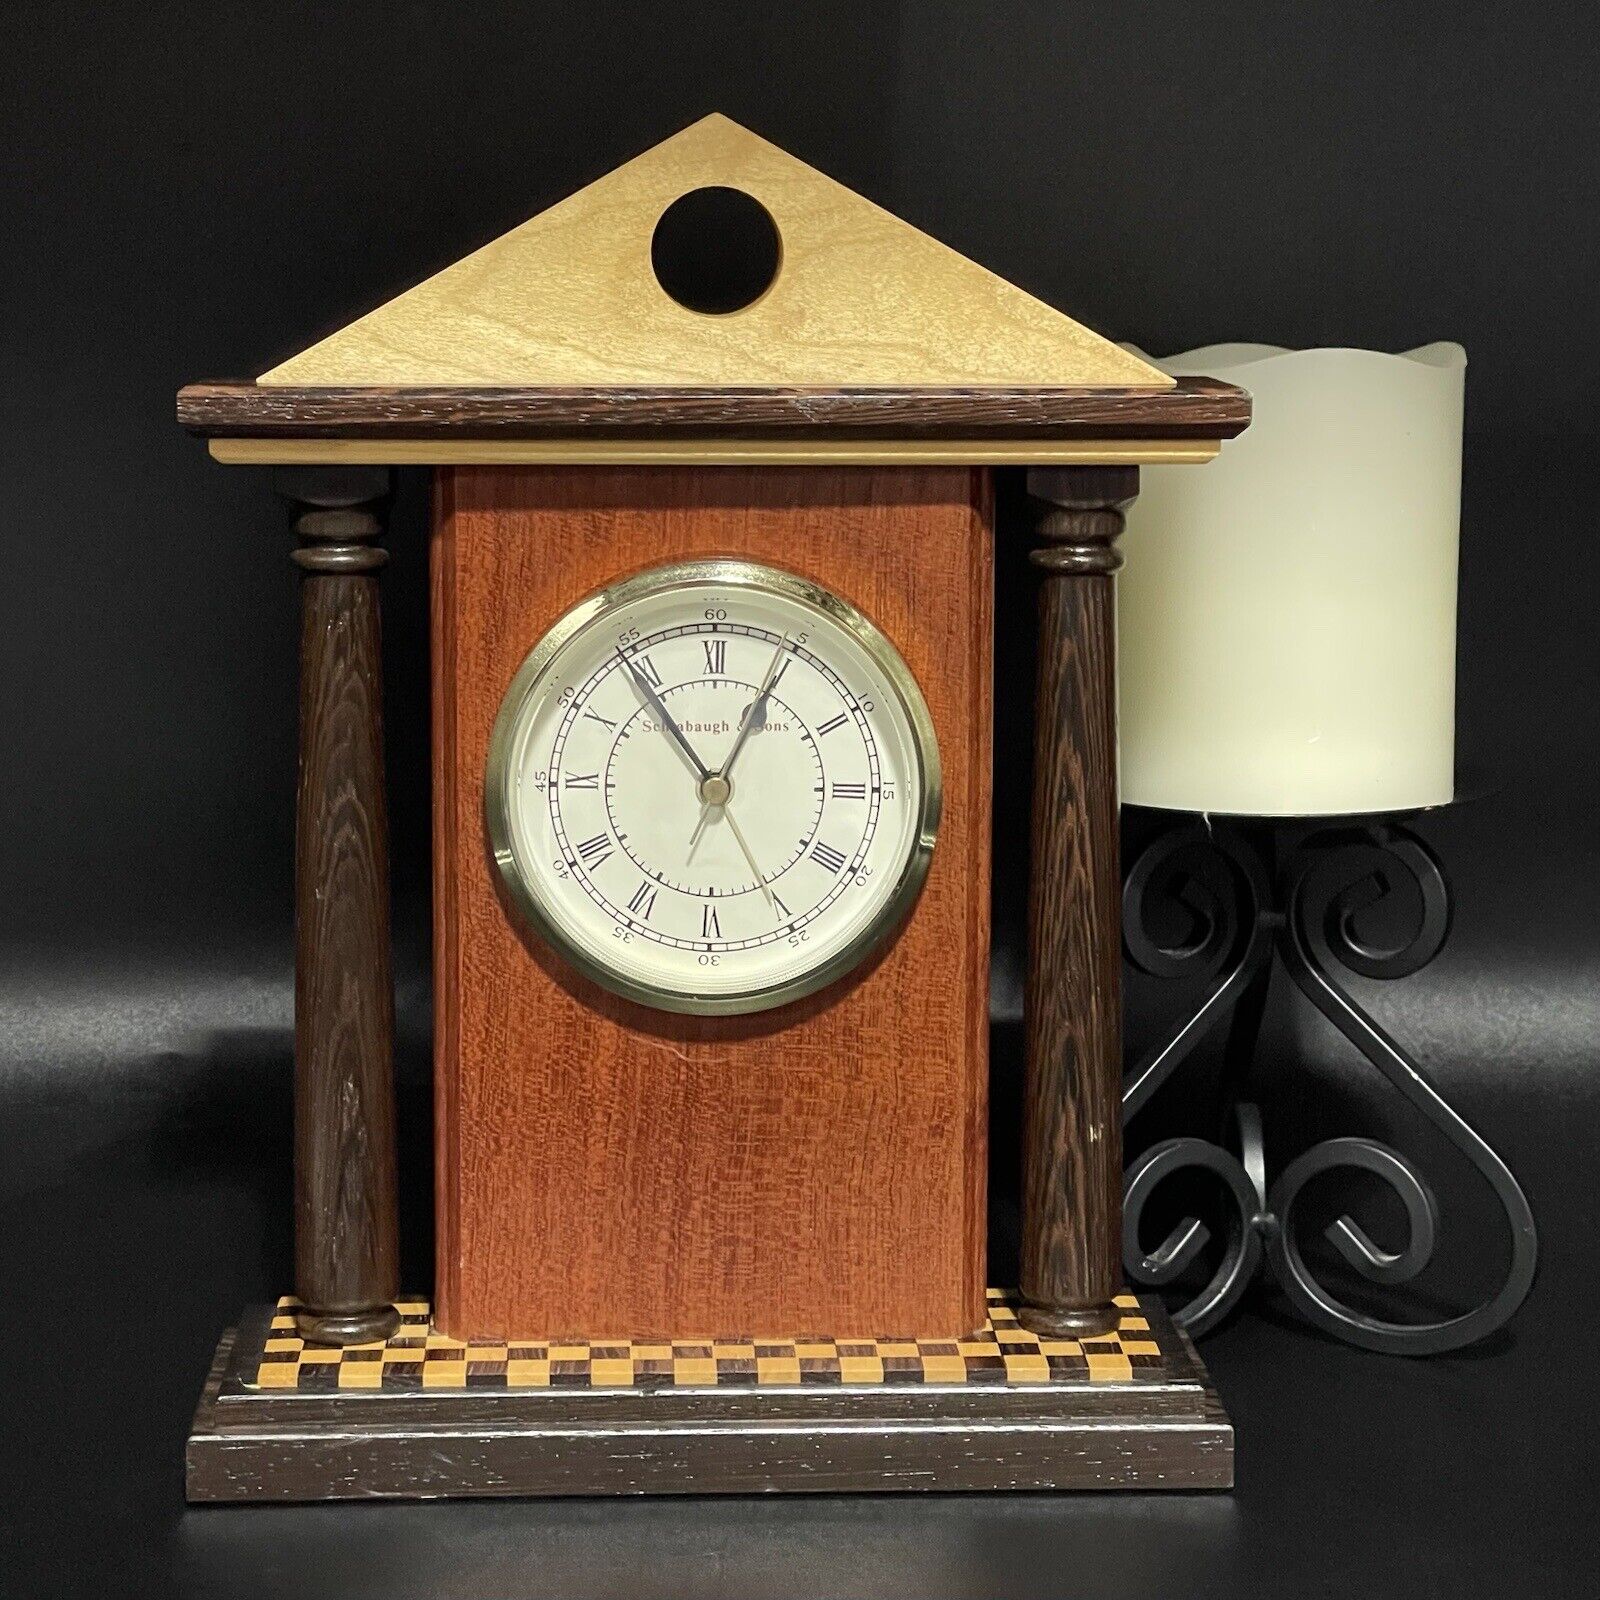 SCHLABAUGH AND SONS Handcrafted Mantel Clock 10-1/2” Tall Tested *